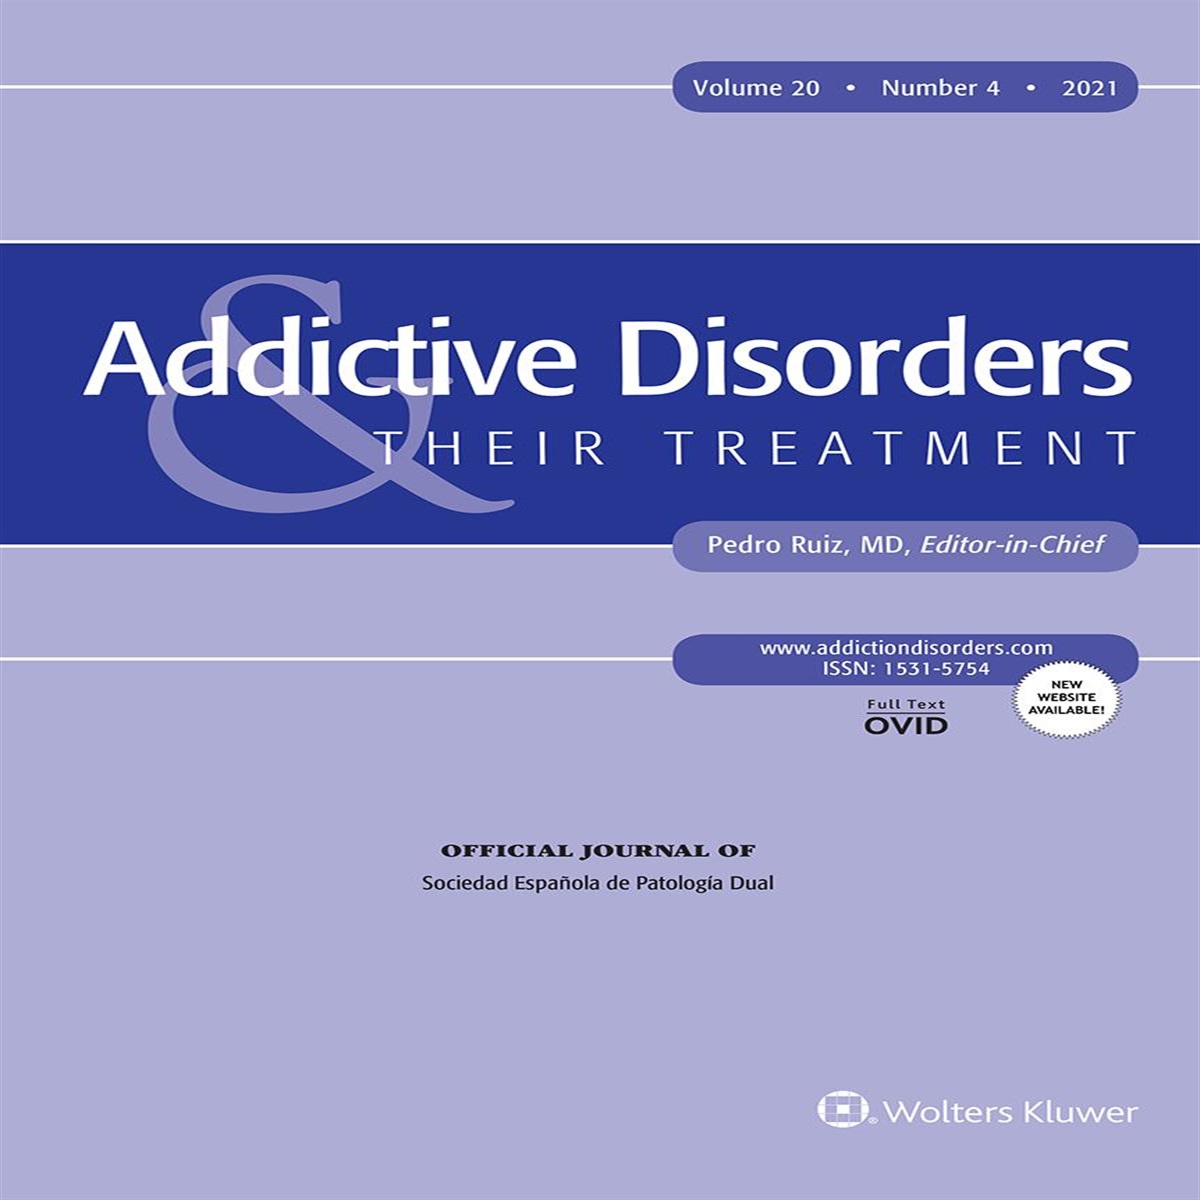 Factors Causing the Tendency to Abuse Addictive Substances in Adolescent Girls